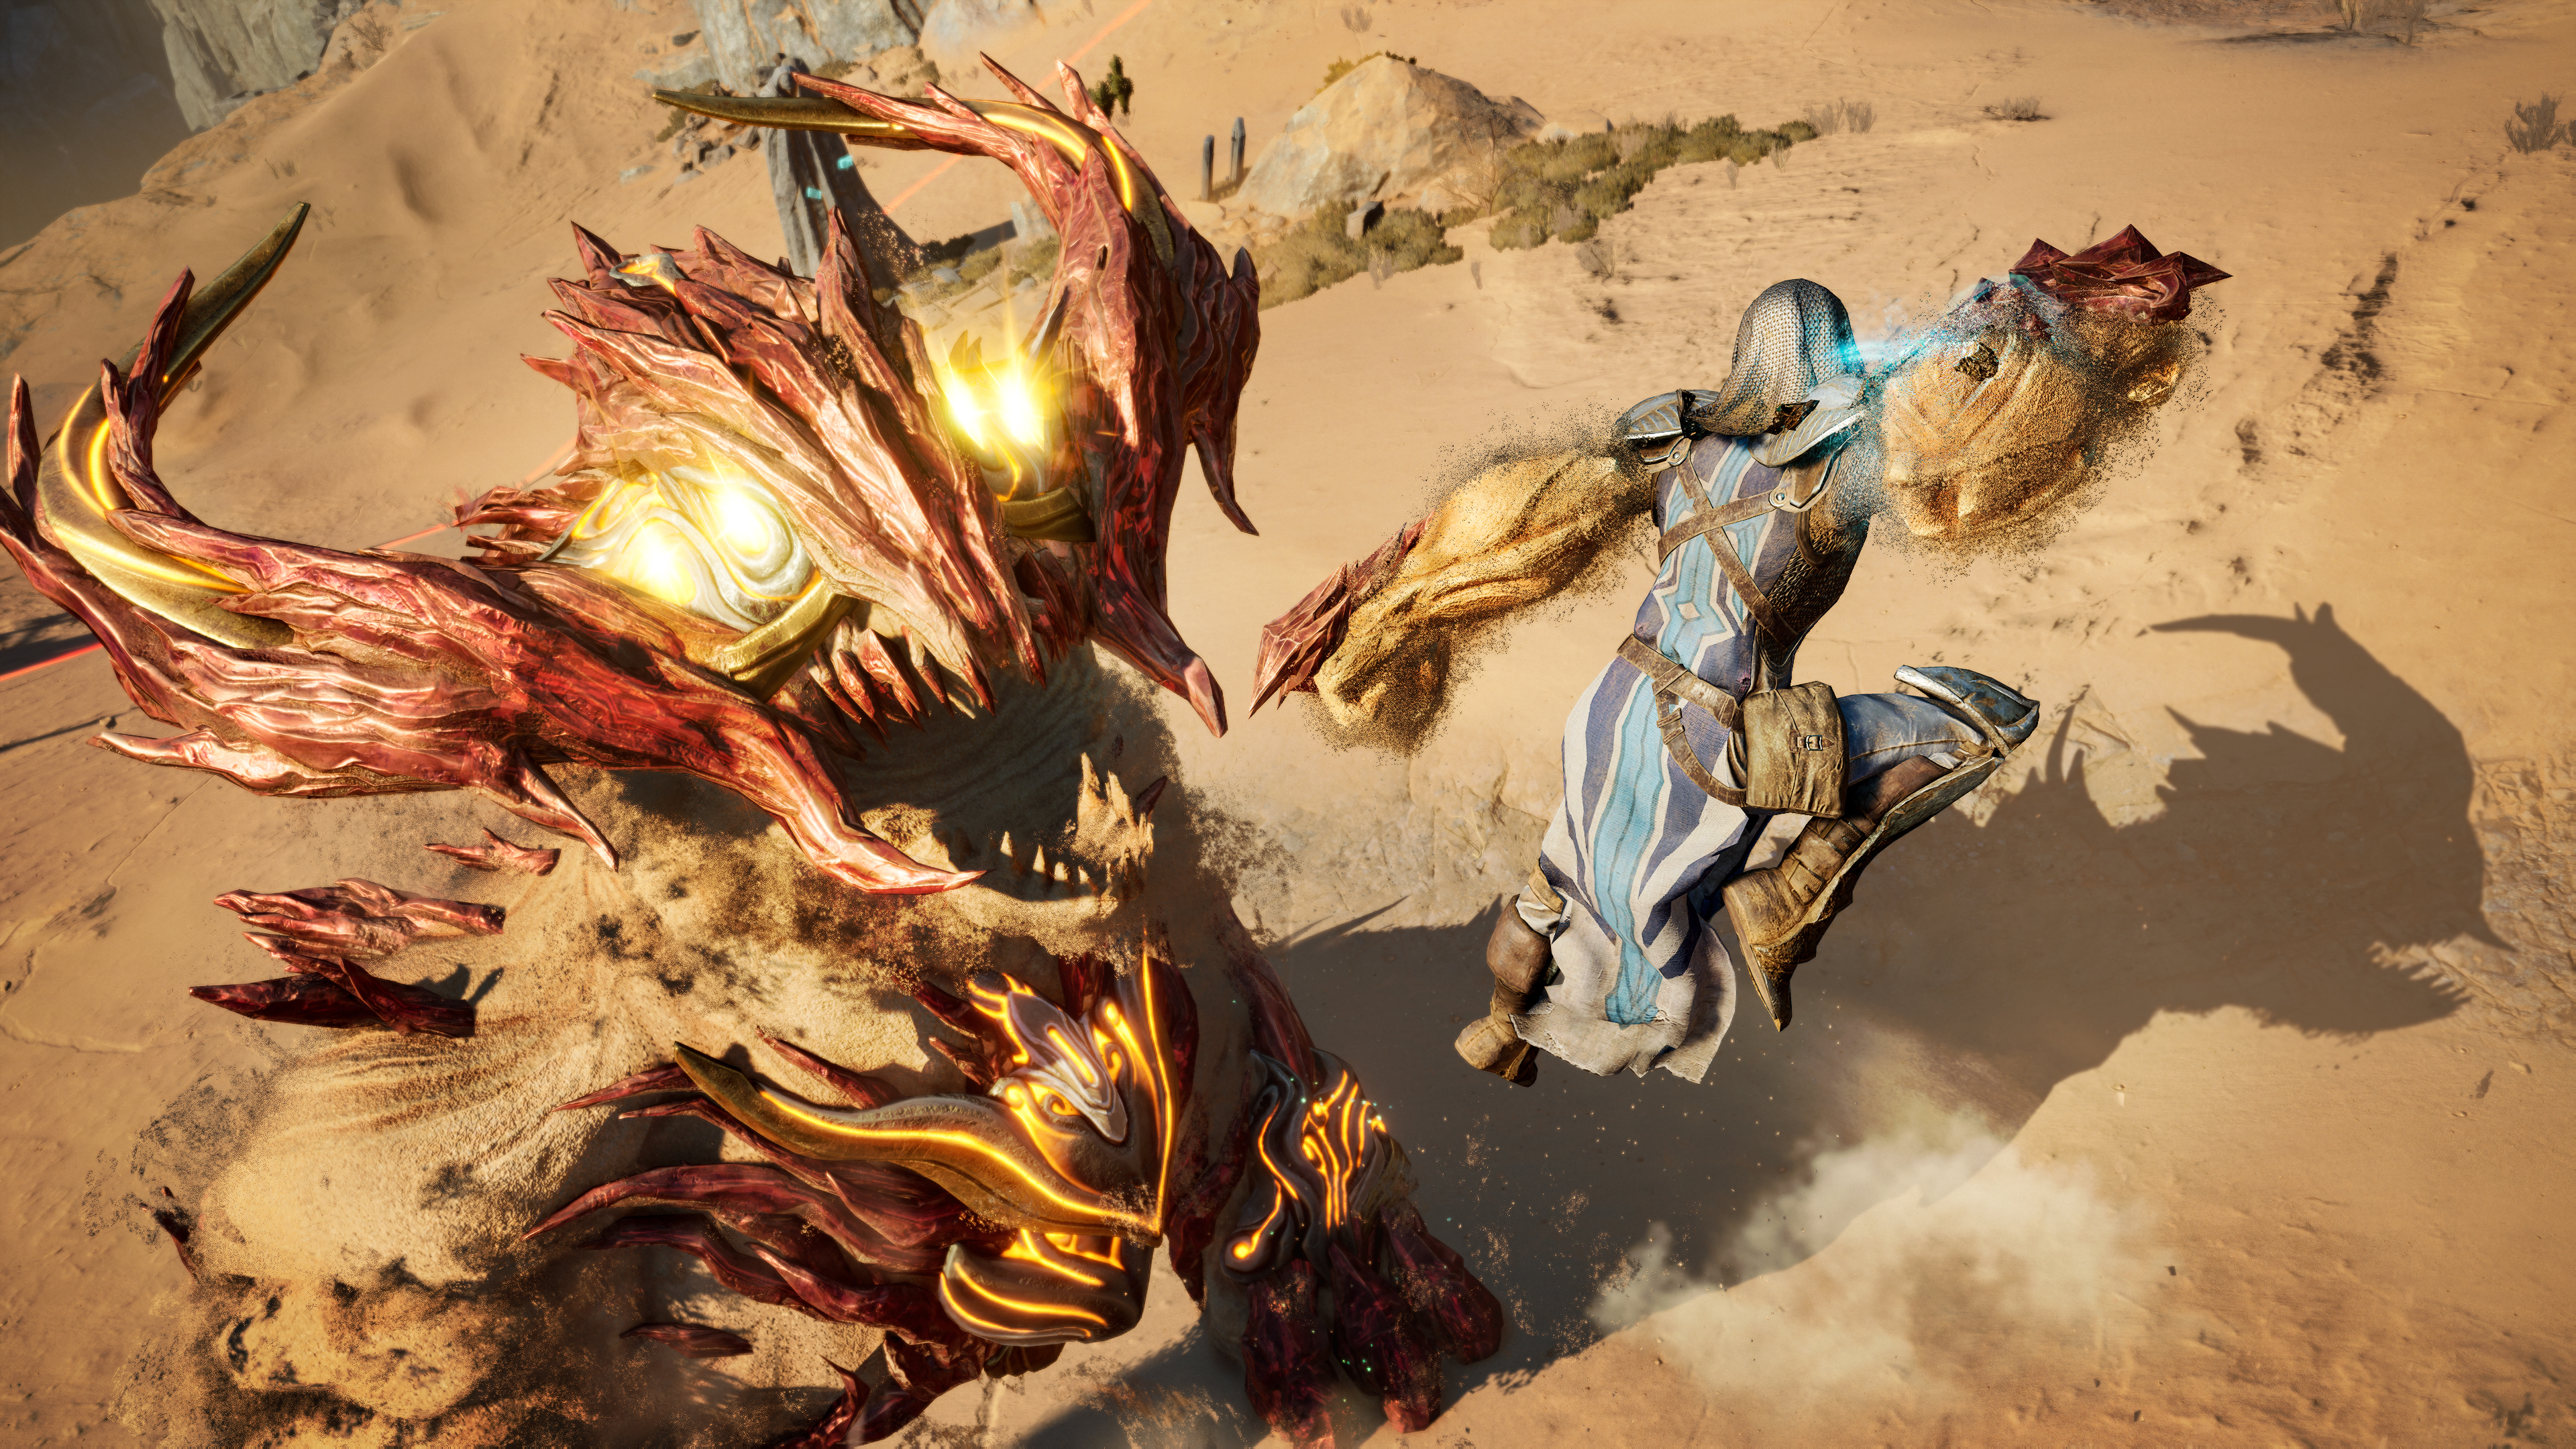 Atlas Fallen's main character leaping into attack against a big crab-like creature